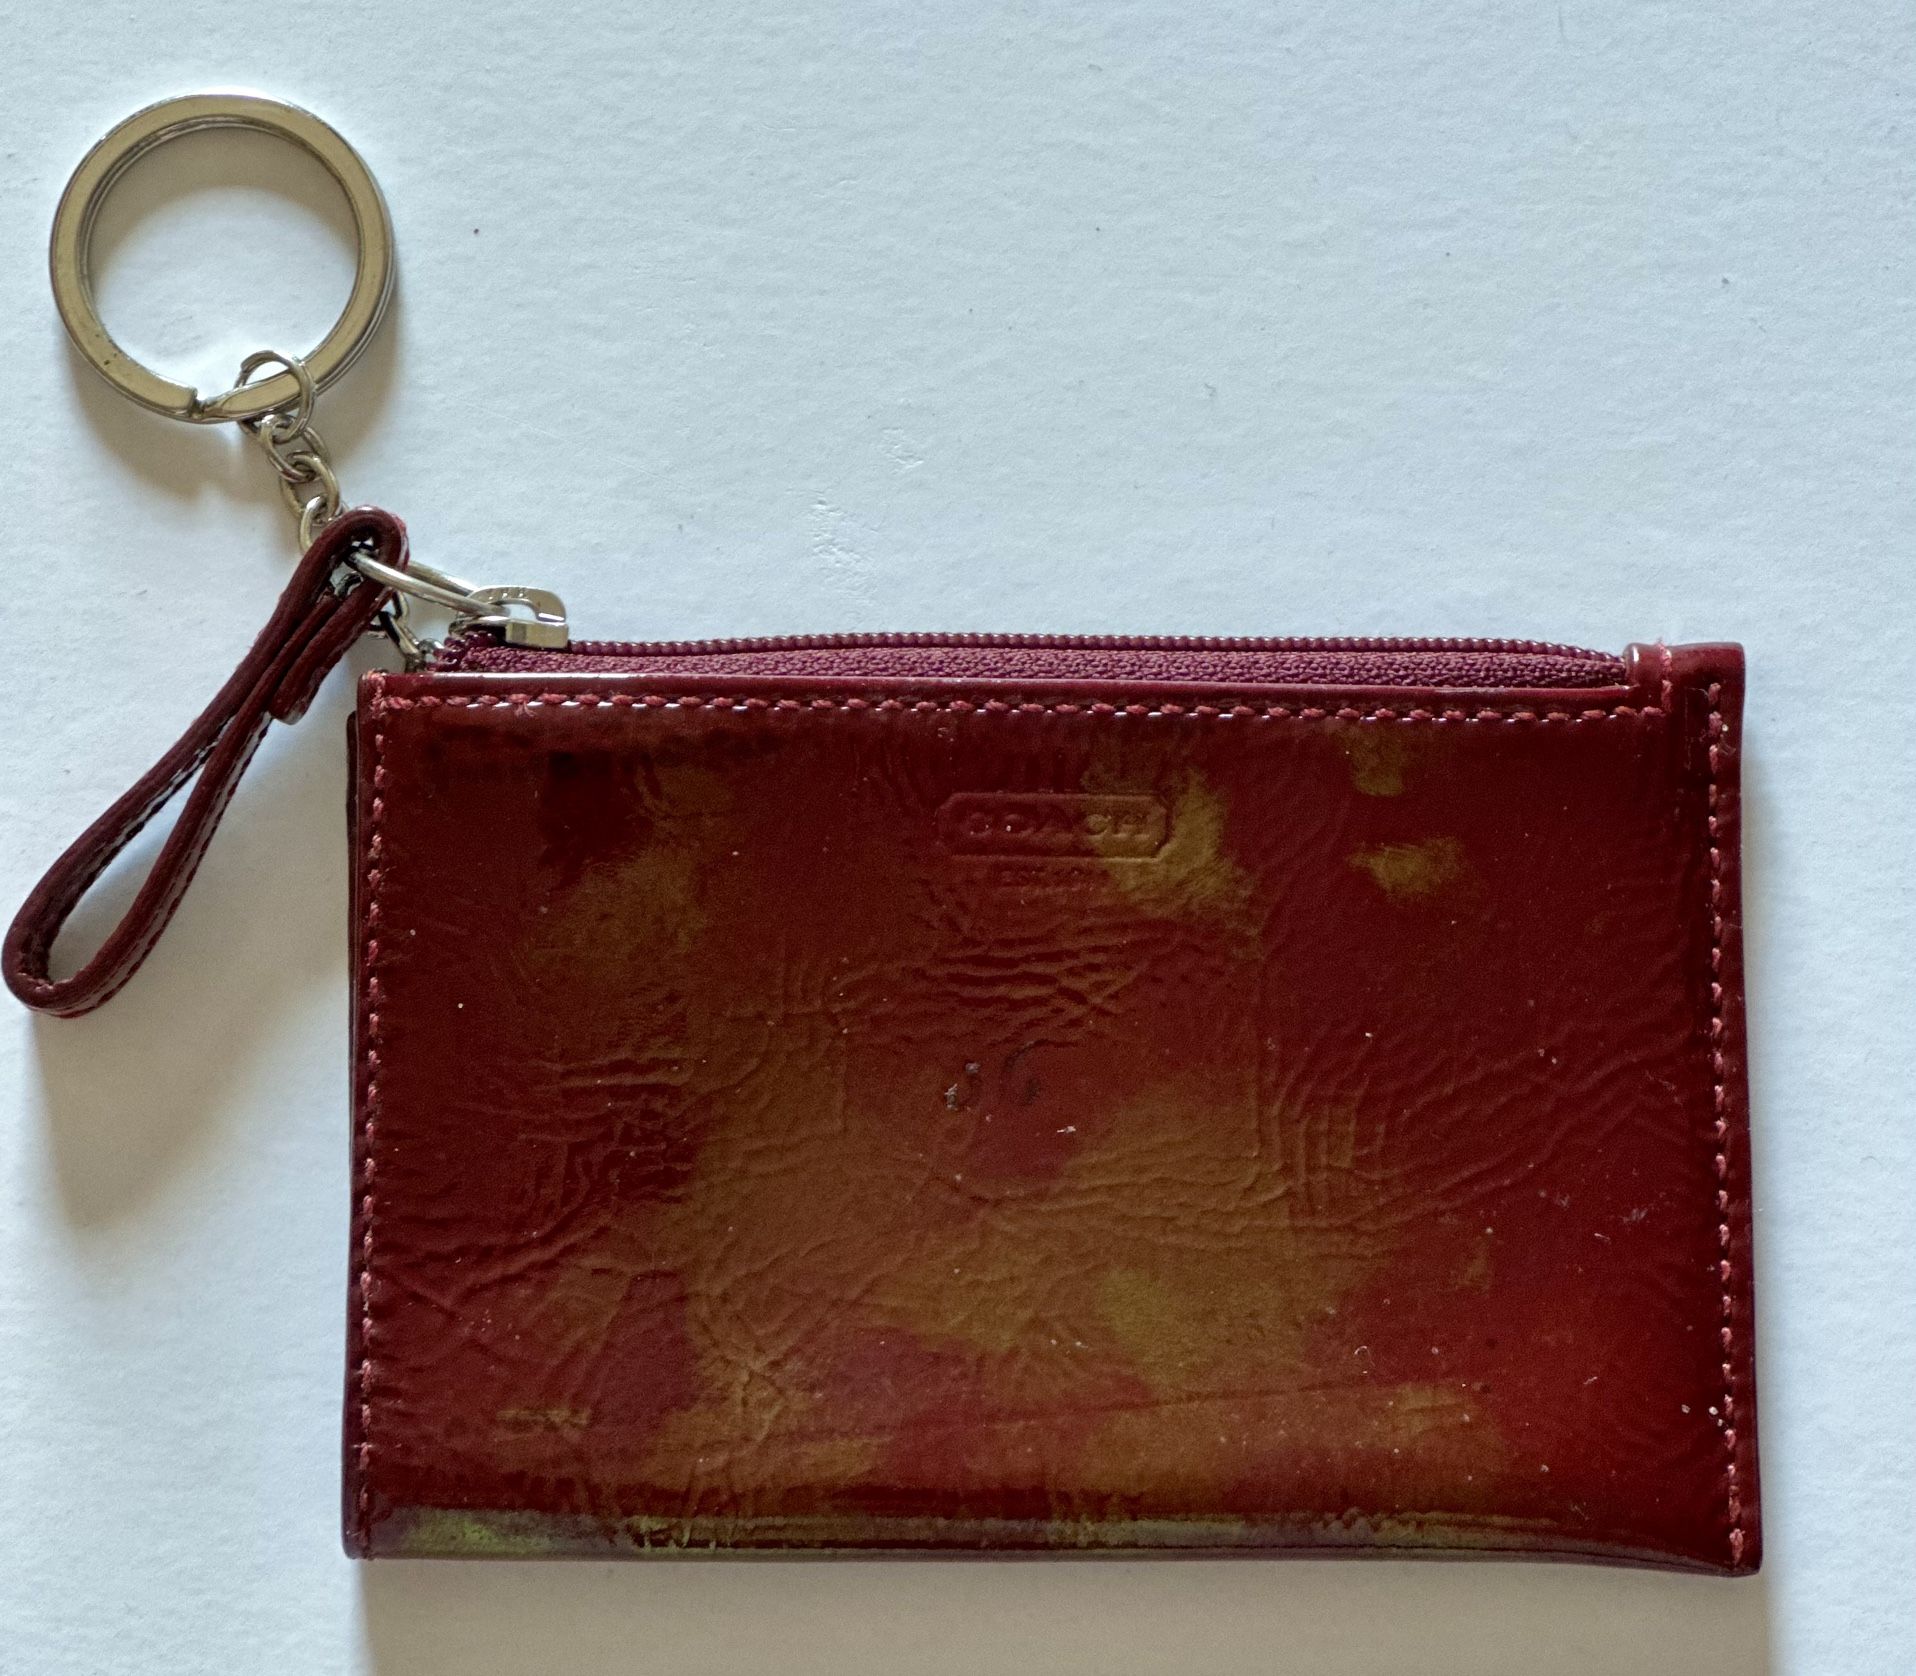 Used - 100% authentic Coach patent maroon keychain wallet